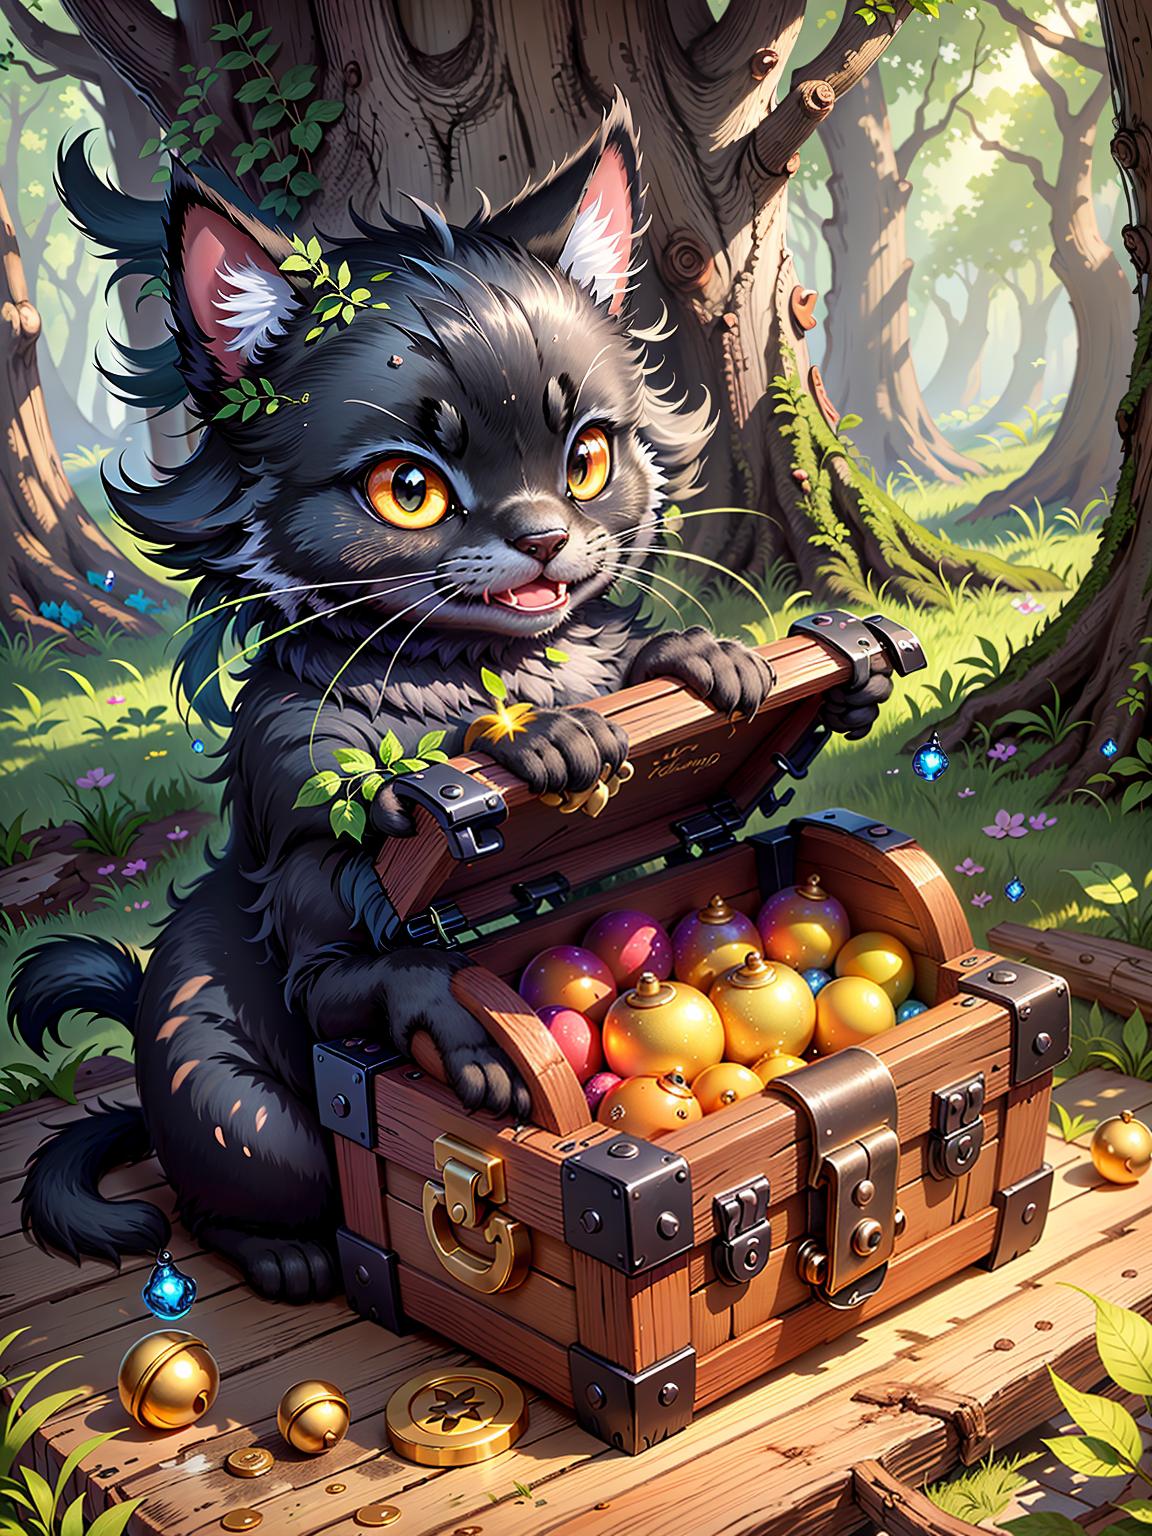  master piece, best quality, ultra detailed, highres, 4k.8k, Black cat, Finding a treasure chest, Cheerful expression, BREAK Discovery of Treasure, Enchanted forest, Treasure chest, pair of boots, BREAK Joyful and mysterious, Sunlight filtering through the trees, magical sparkles in the air, fun00d